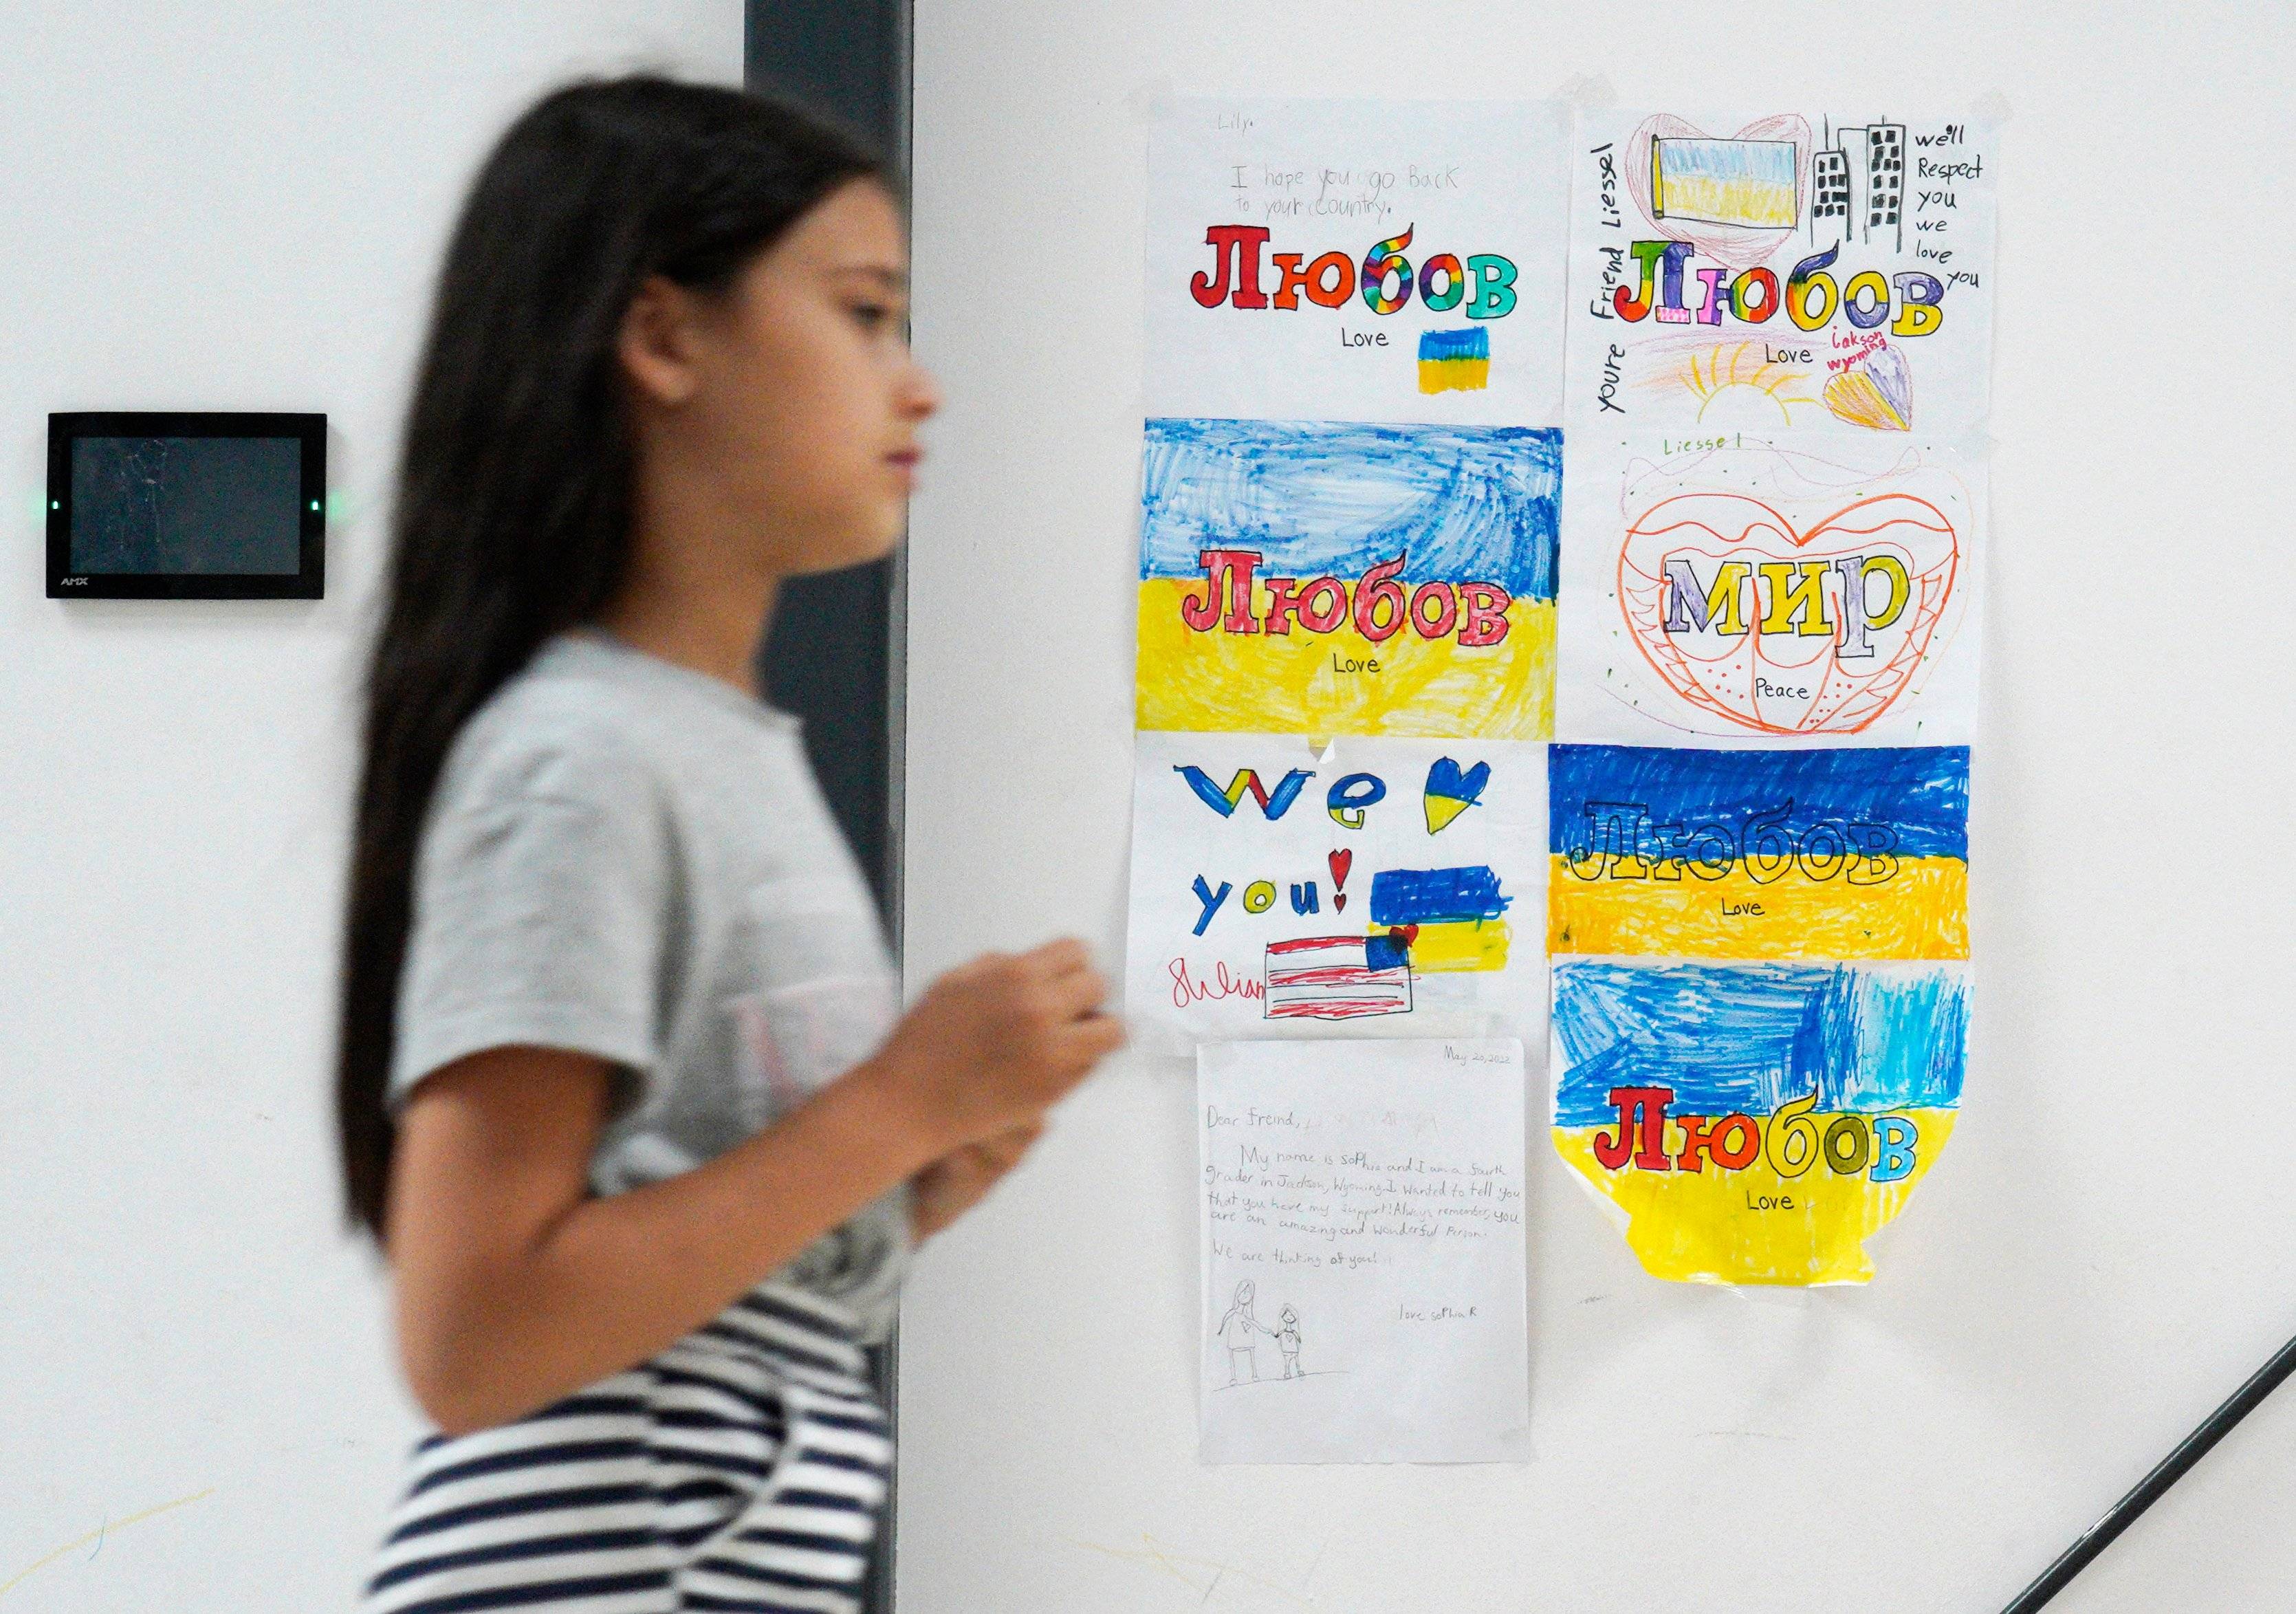 A refugee from Ukraine walks past children drawings reading "love, peace", in the Humanitarian Aid Center set up at the Global Expo exhibition hall in Warsaw on July 15, 2022. The makeshift refugee centre was meant to be a temporary solution but as the war drags on, their lives are still on hold. (Photo by Alik KEPLICZ / AFP) / TO GO WITH AFP STORY BY NELL SAIGNES - TO GO WITH AFP STORY BY NELL SAIGNES